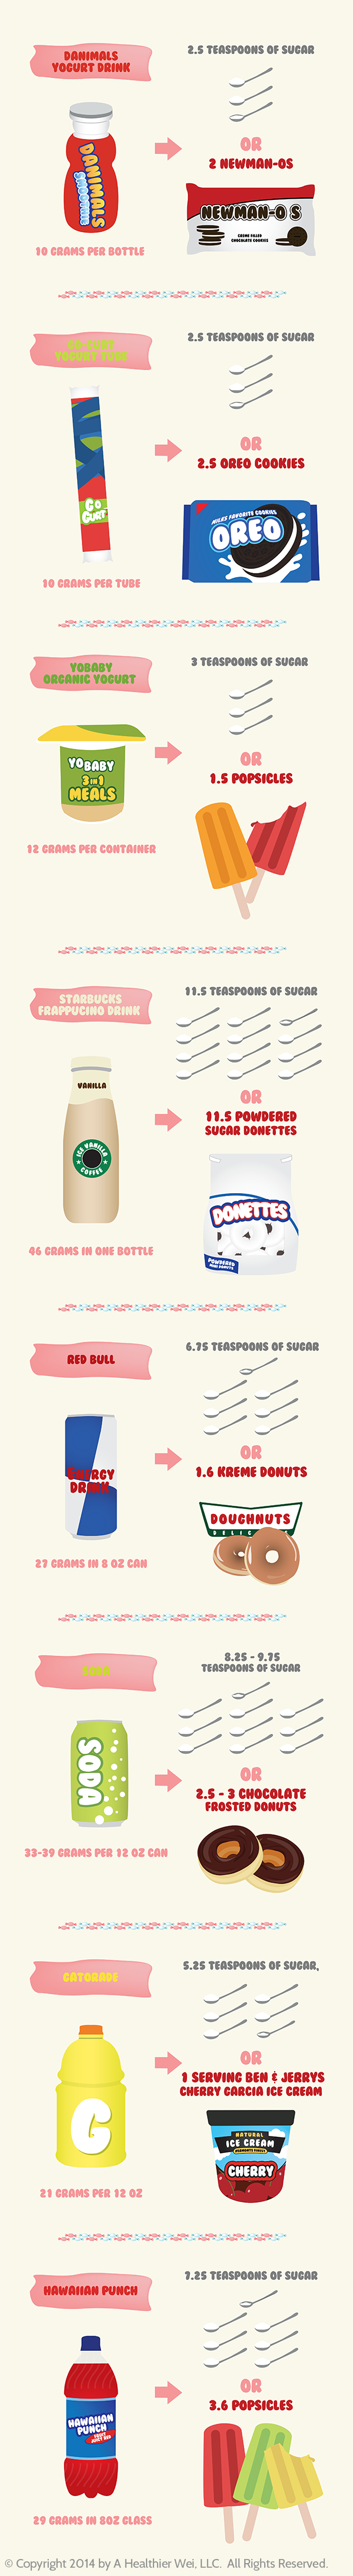 Infographic of the amount of sugar in popular kids' drinks